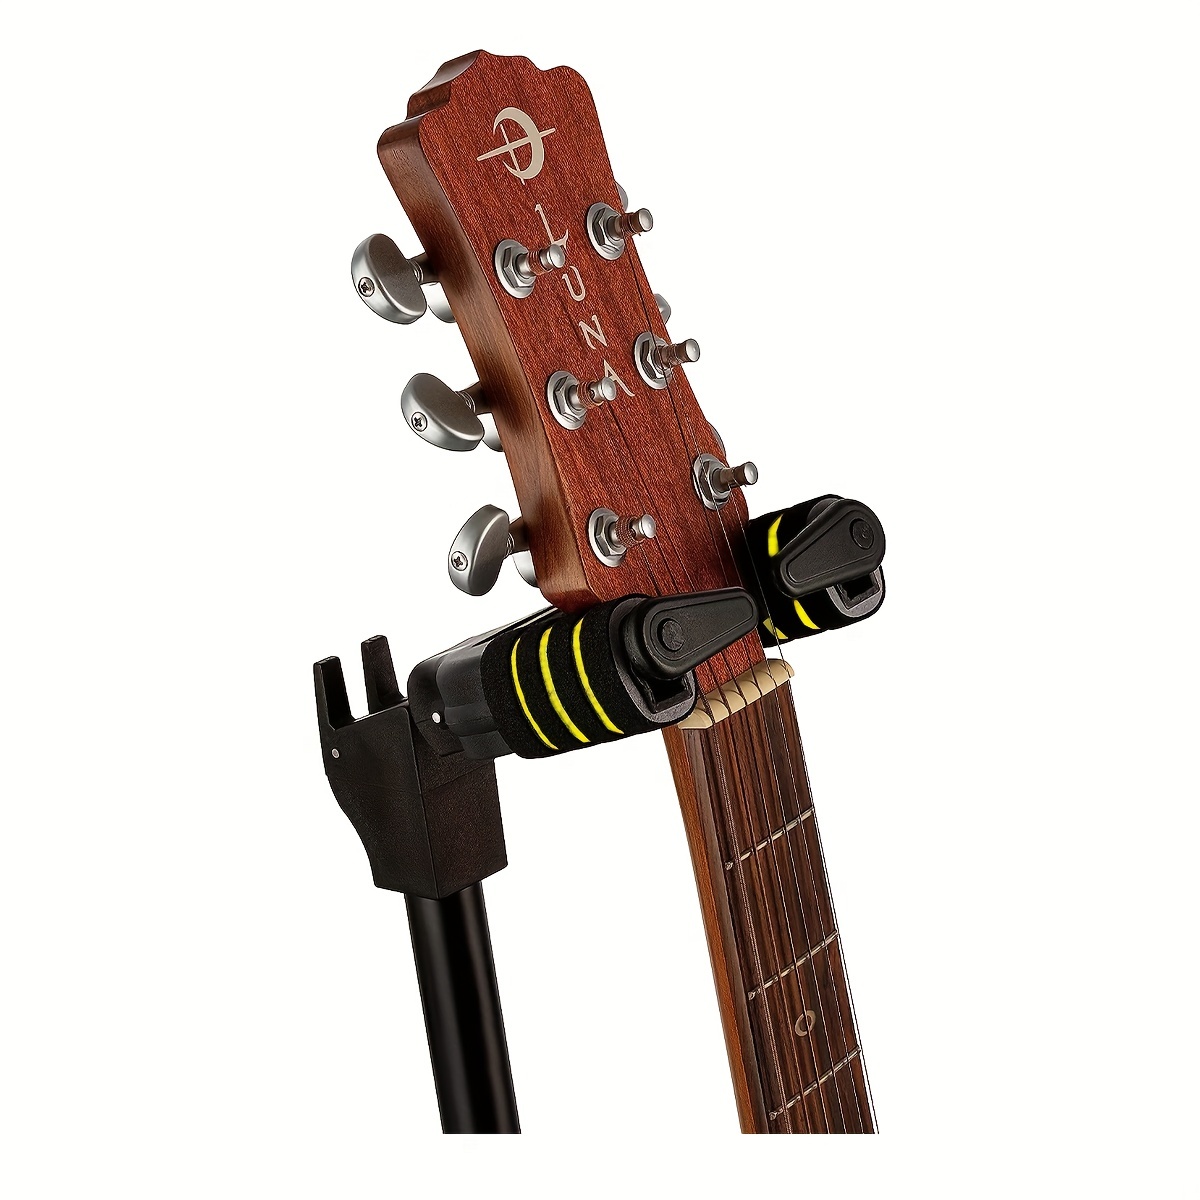 Lordel Musique Stand guitare universel